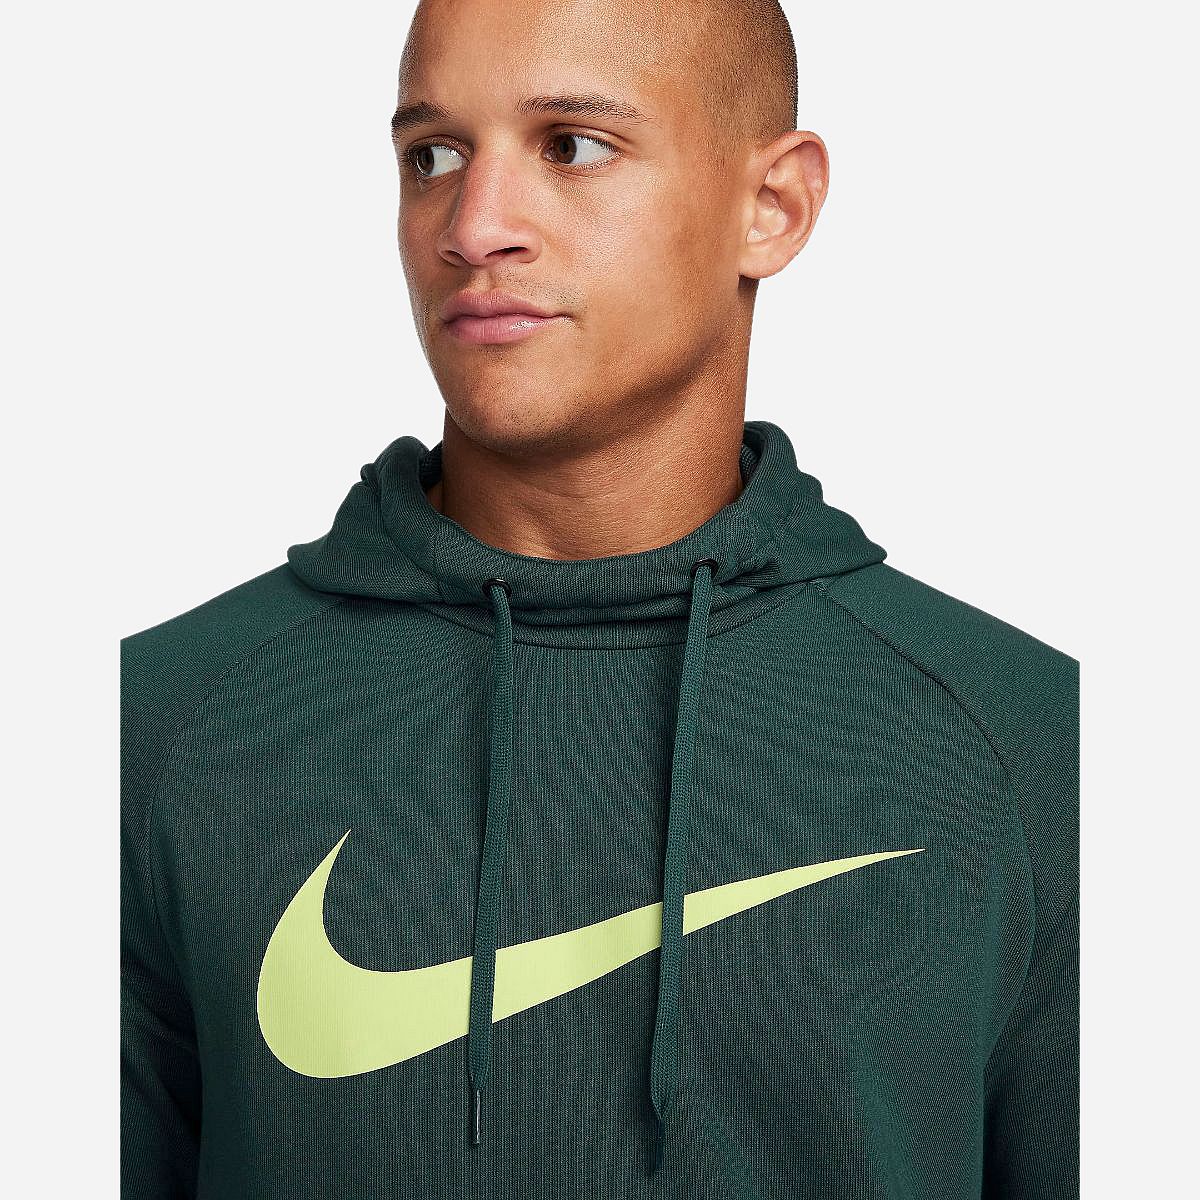 AN305983 Dri-fit Heren Pullover Training Hoodie